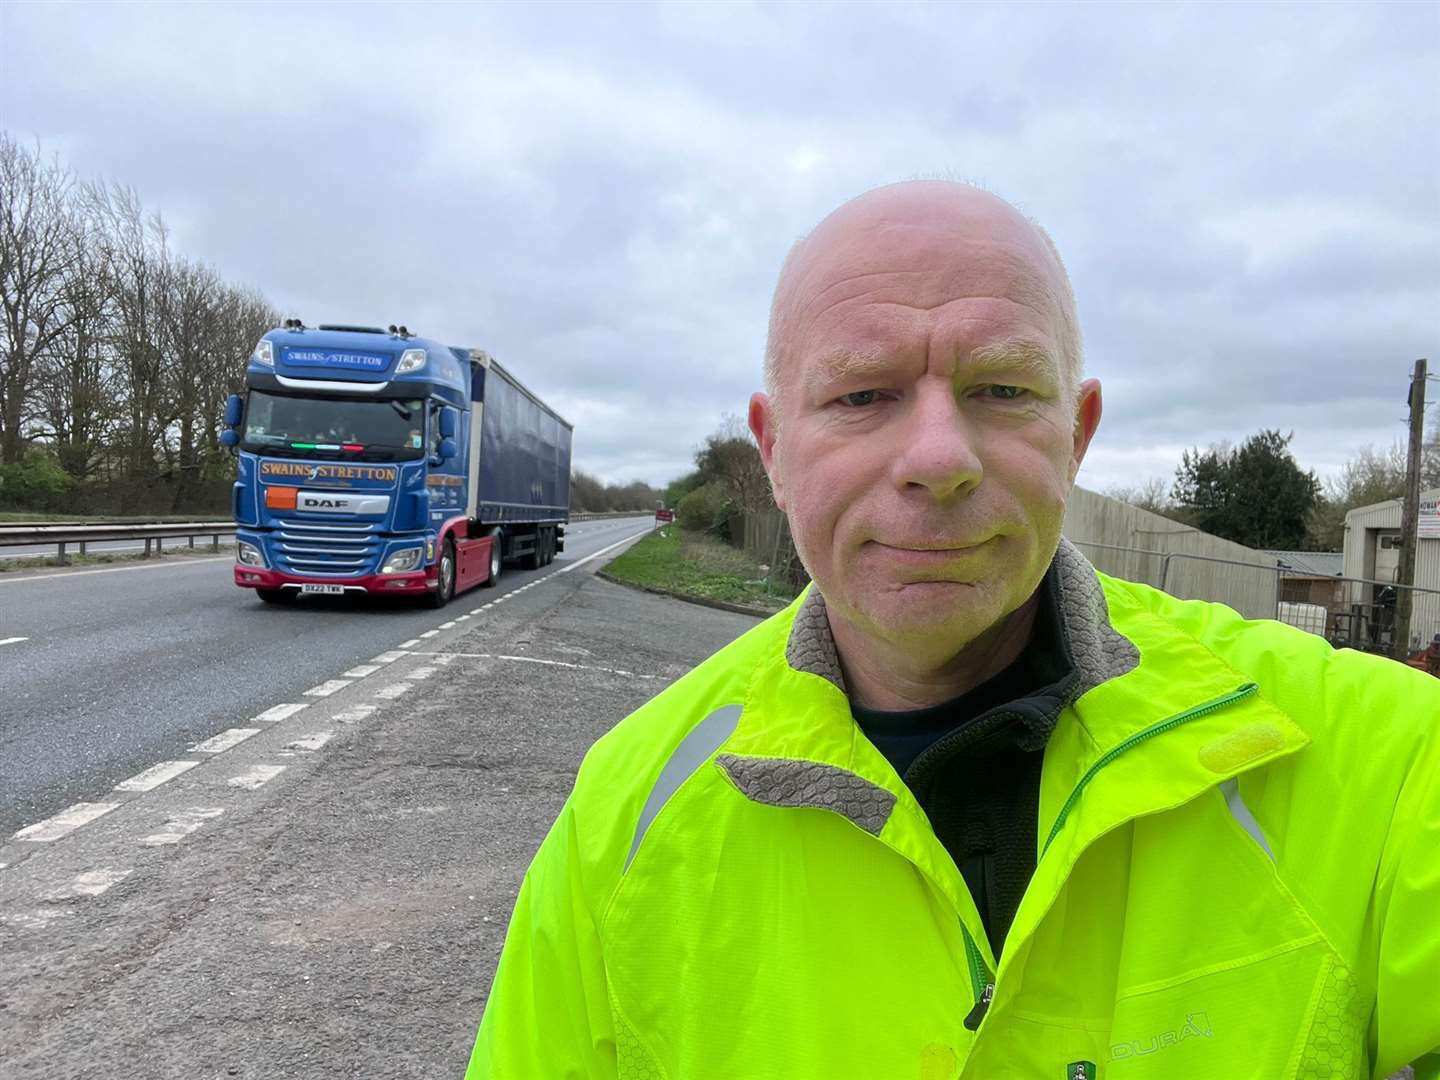 Canterbury city councillor and Kent county councillor Mike Sole says warning signs would alert drivers to the dangerous junction. Picture: Mike Sole